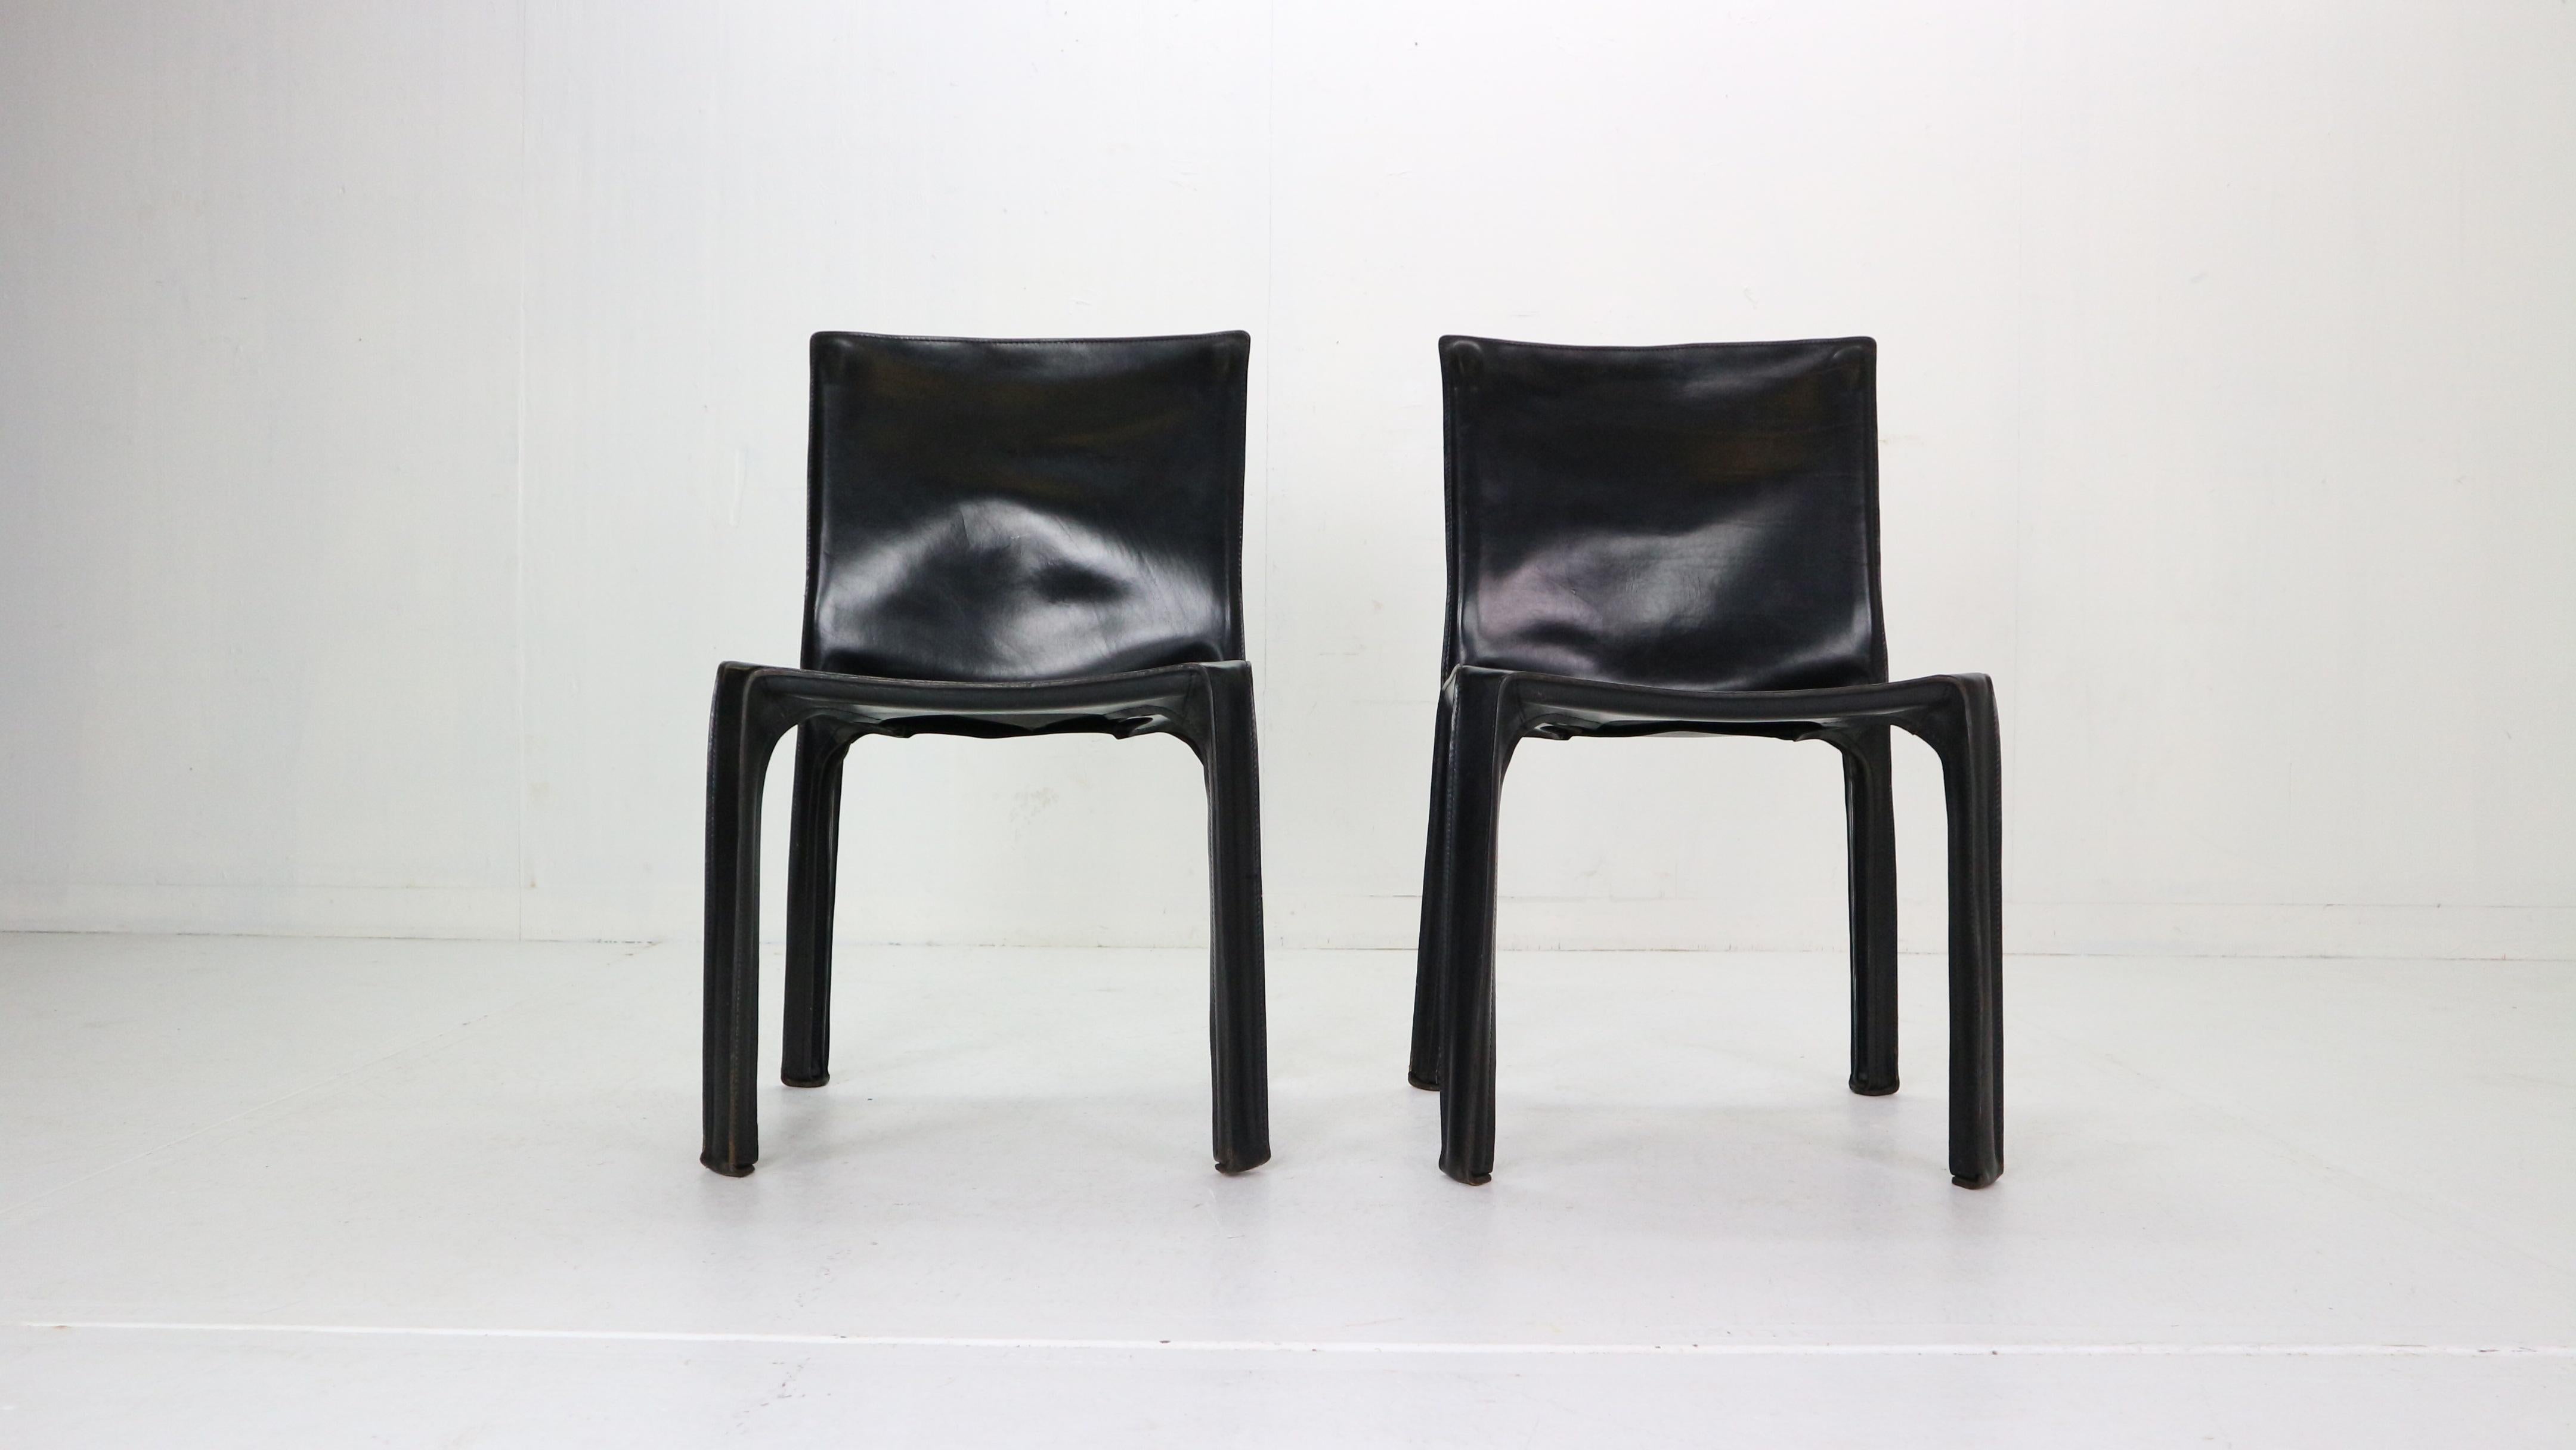 Set of 2 dining room chairs designed by Mario Bellini and manufactured by high quality design furniture fabric- Cassina in 1970s period, Italy.
This chairs are the early edition of the manufacture.
Model- Cab 412. All chairs are marked and in a